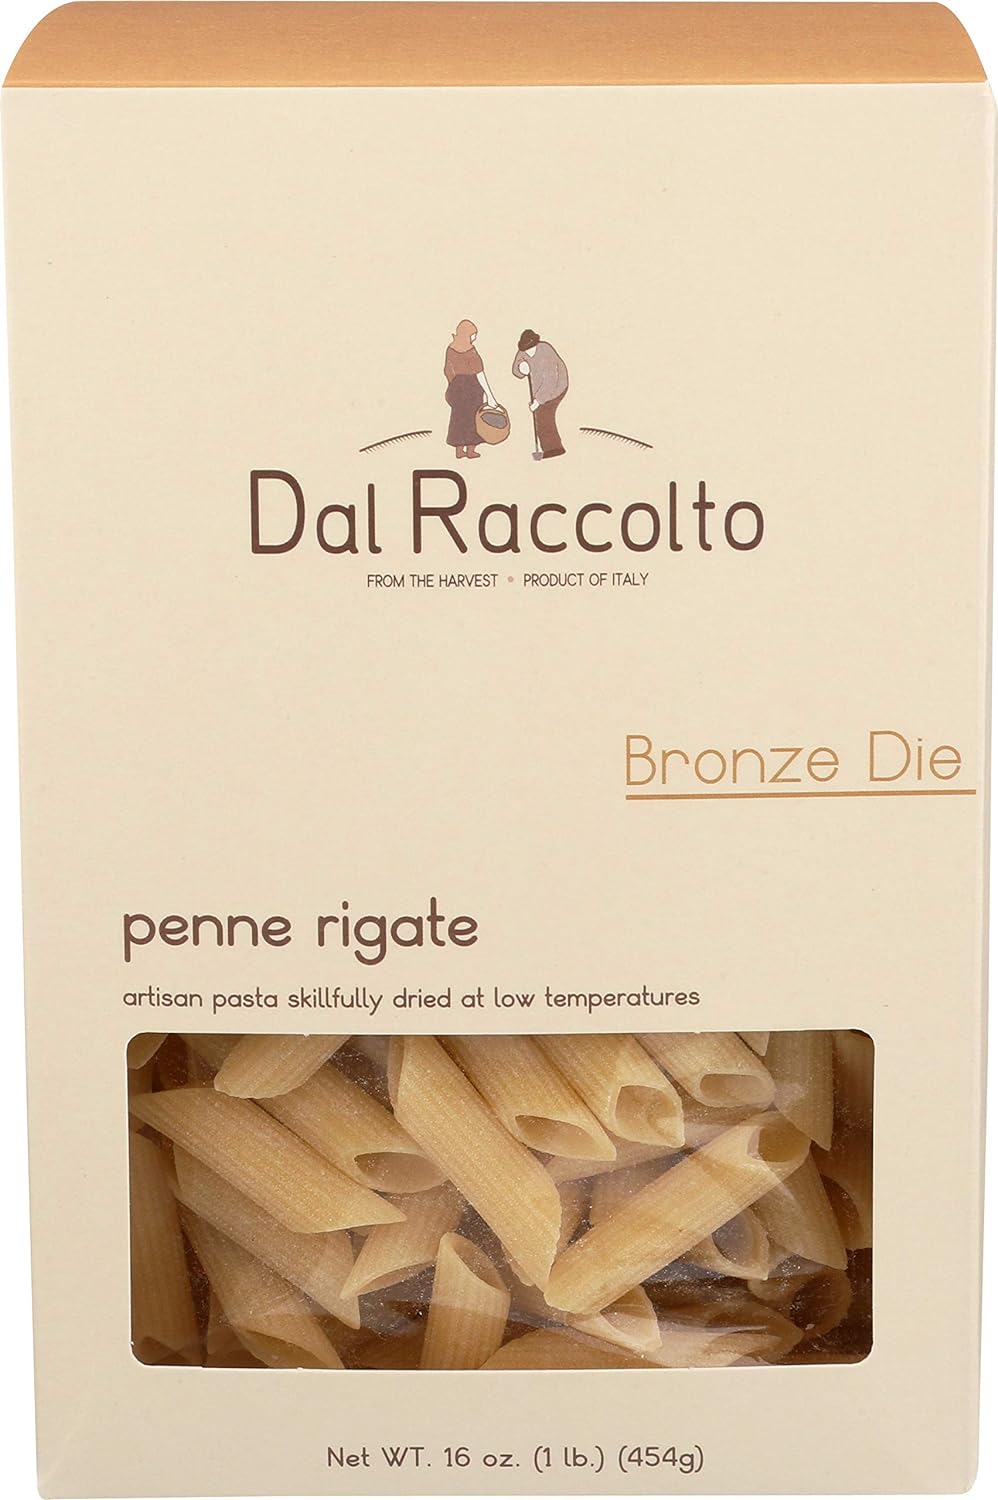 Dal Raccolto Bronze Die Pasta - Penne Rigate, 1 lb Box : Coffee Substitutes : Grocery & Gourmet Food